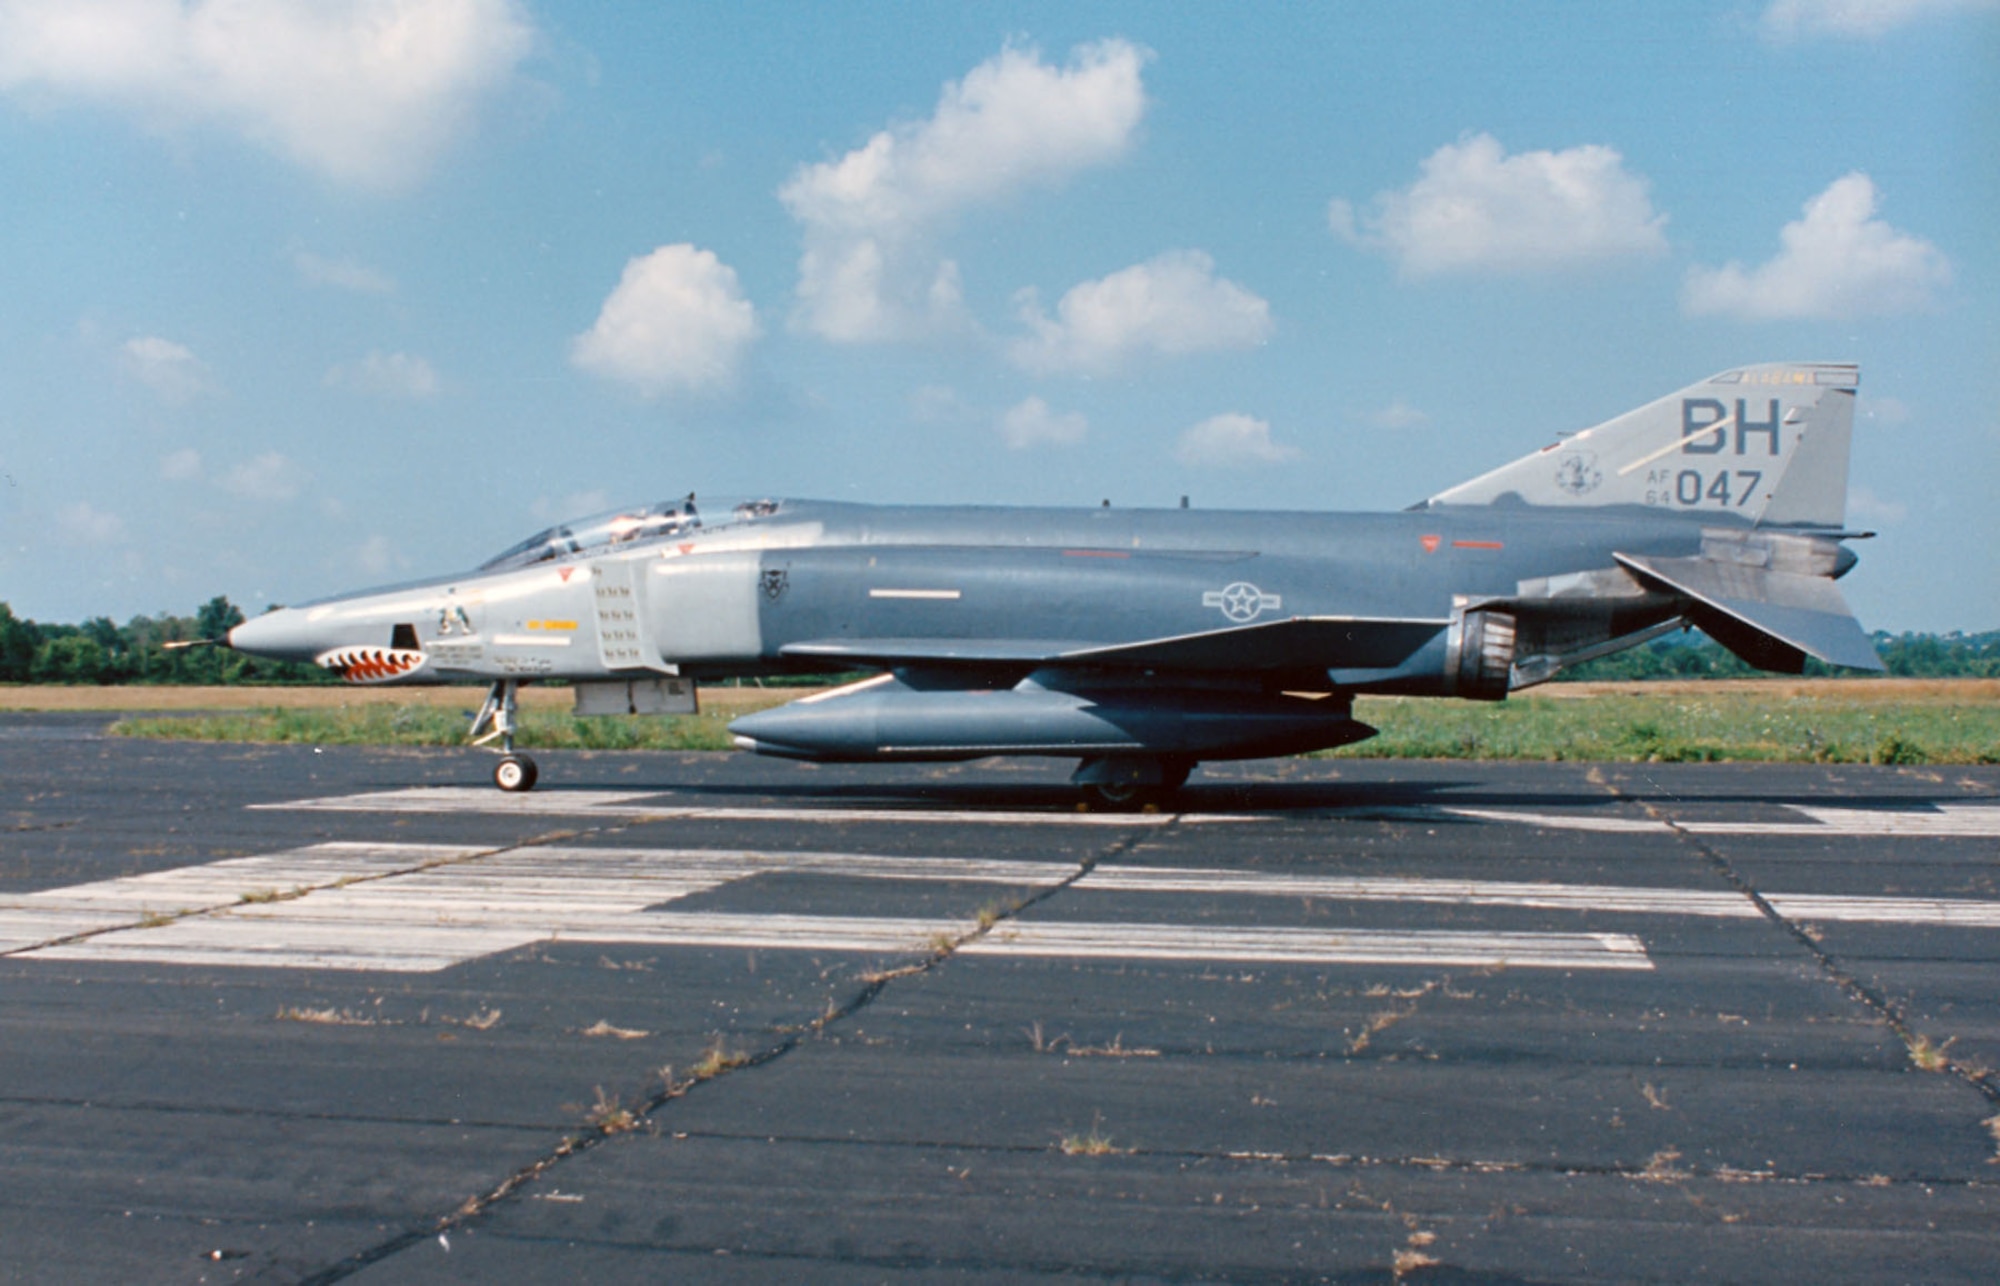 DAYTON, Ohio -- McDonnell Douglas RF-4C Phantom II at the National Museum of the United States Air Force. (U.S. Air Force photo)